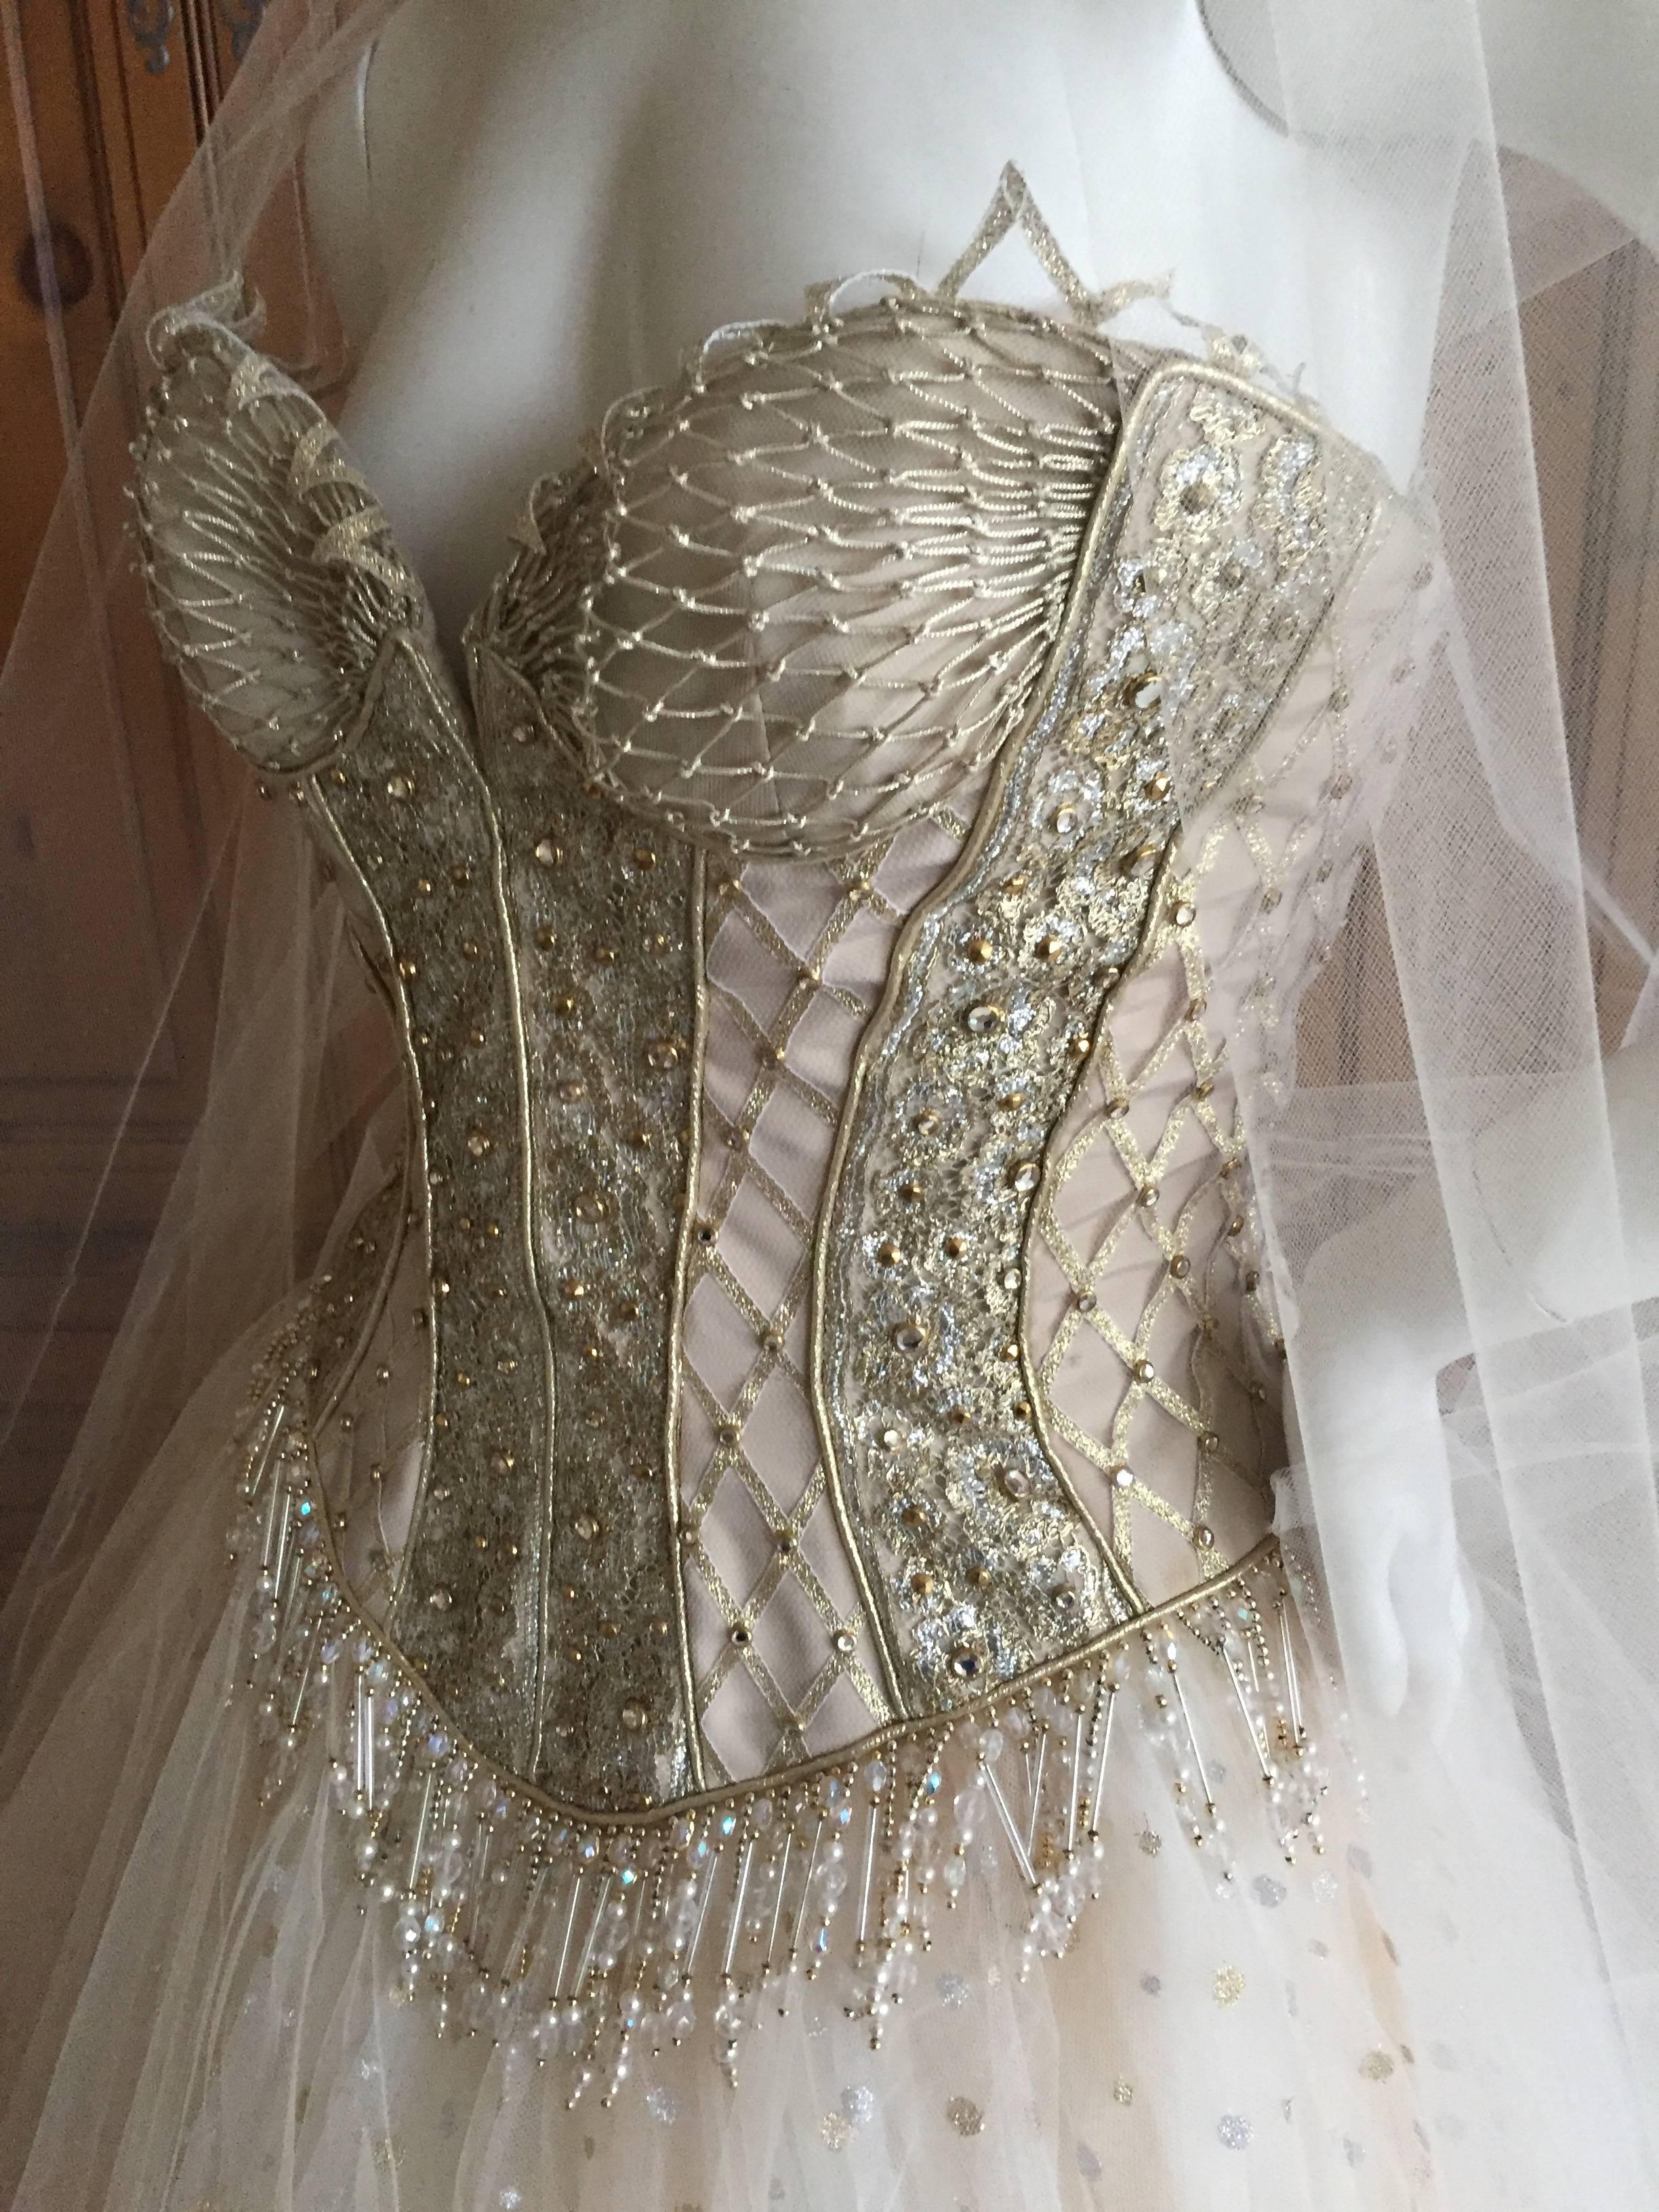 Bob Mackie dreamy ivory ballerina dress.
Ivory with silver and gold accents, with light brown topaz crystals
This is so romantic, the skirt is very full with under layers expertly draped.
The corset top is embellished with crystals overlaid on the